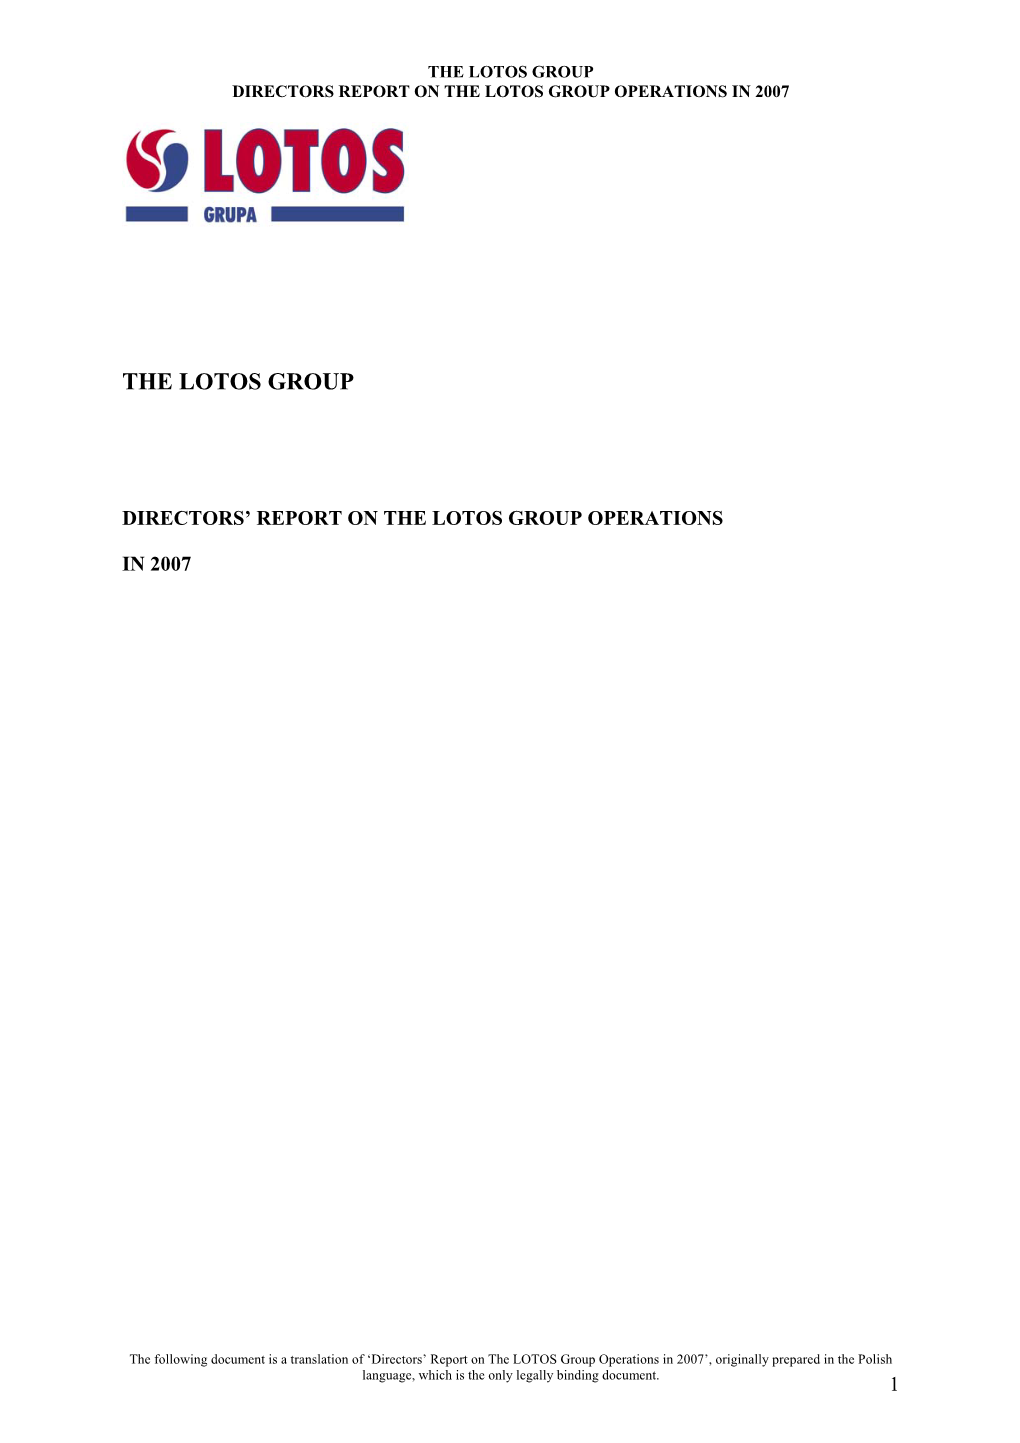 Directors Report on LOTOS Group Operations